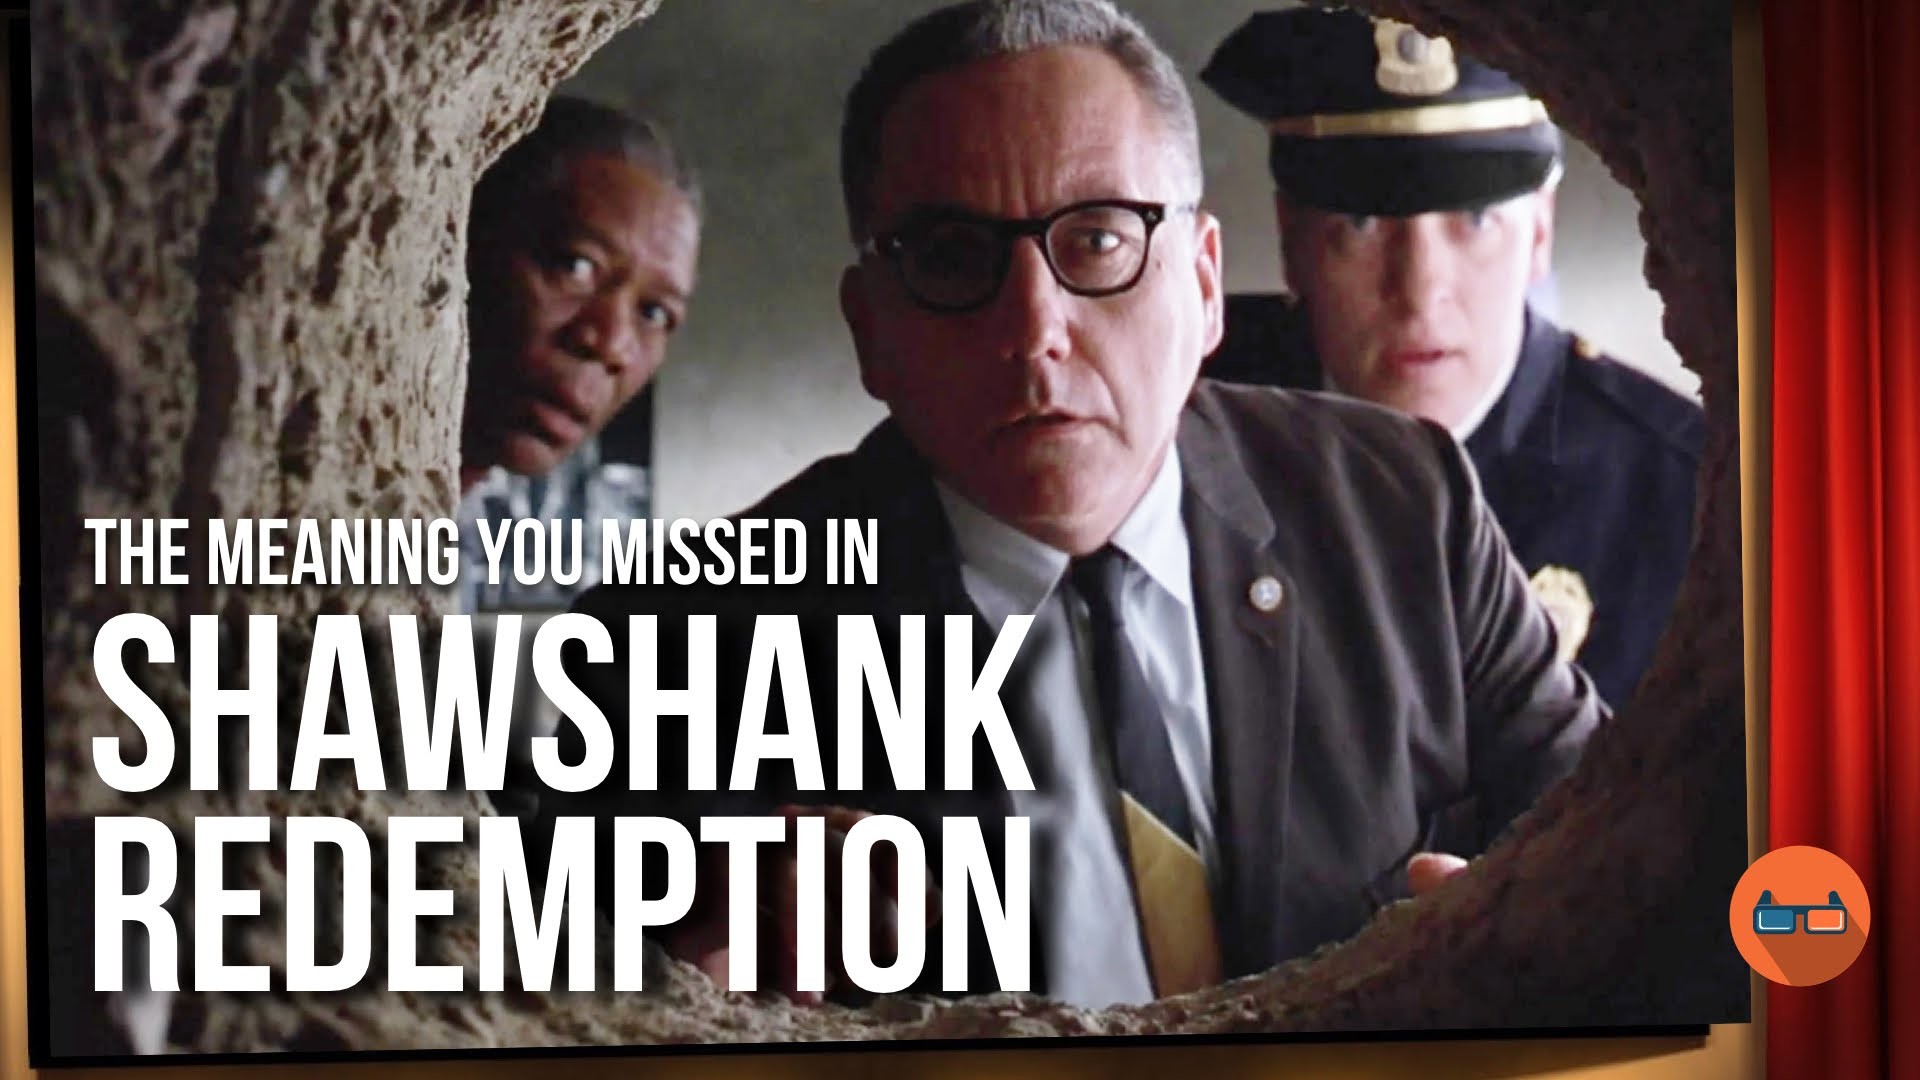 1920x1080 The Hidden Meaning in the Shawshank Redemption - Logos Made Flesh